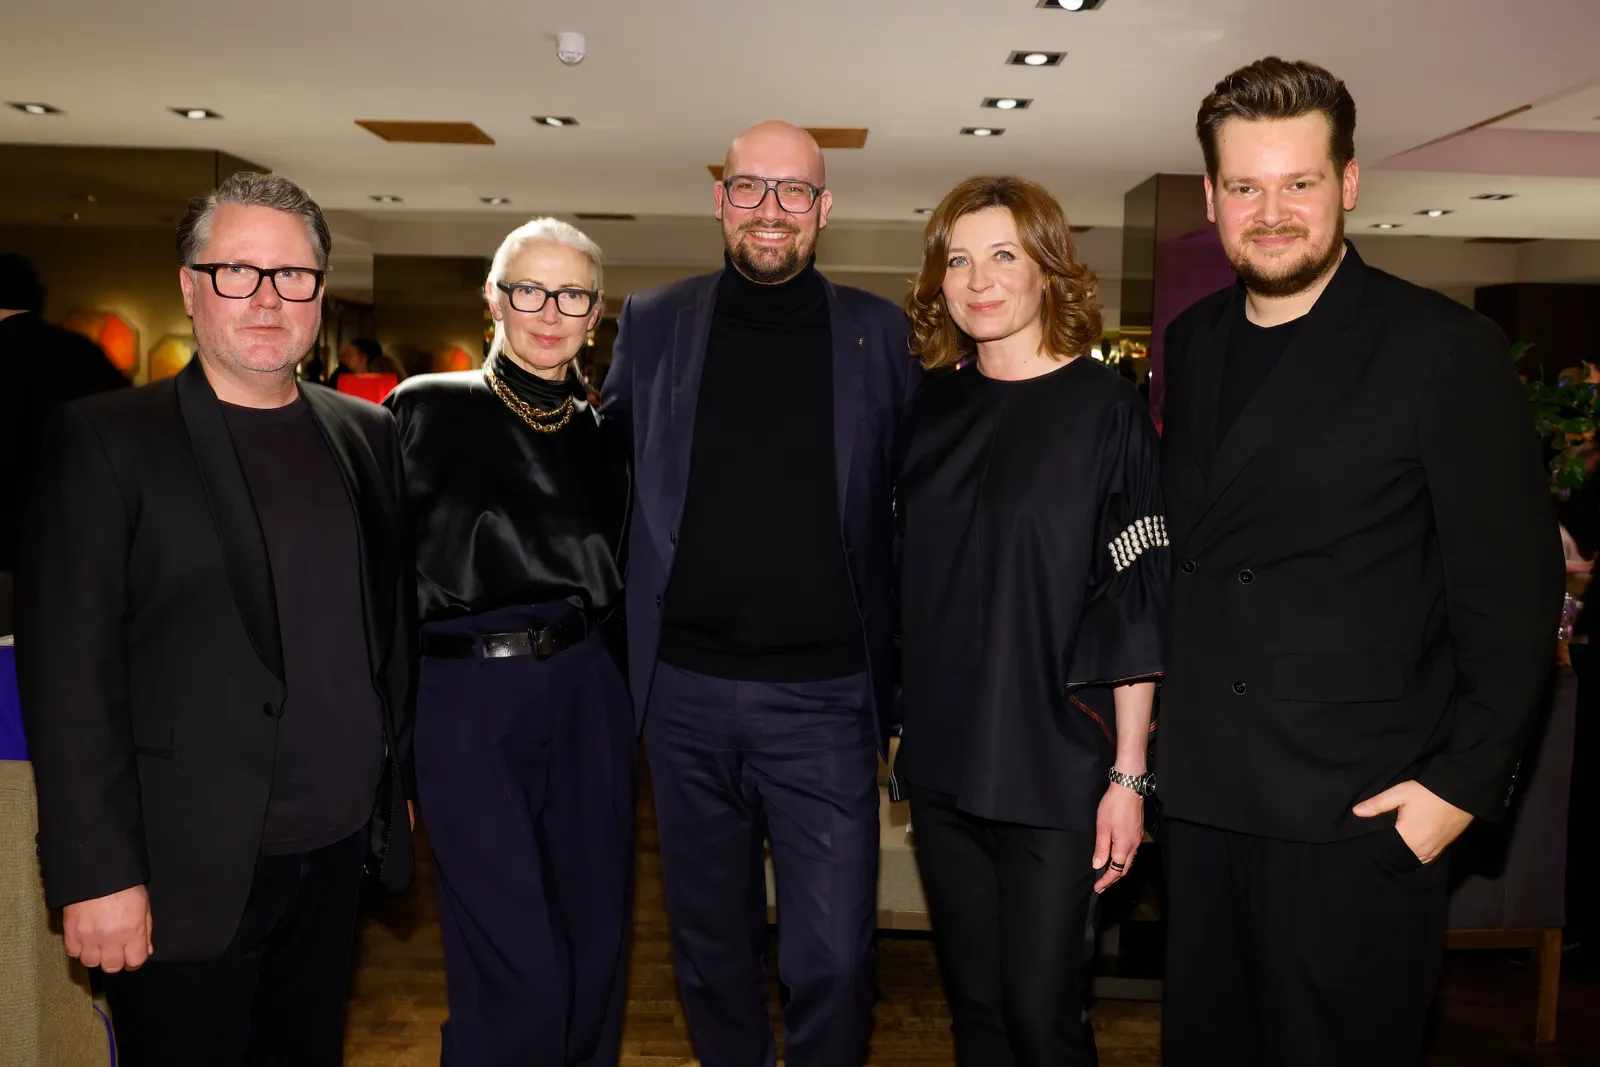 From left to right: Scott Lipinski (CEO Fashion Council Germany), Christiane Arp (Chairwoman of the Board and founding member of Fashion Council Germany), State Secretary for Economic Affairs Michael Biel, Anita Gigovskaya (Deputy Managing Director, Condé Nast Europe), Patrick Pendiuk (Senior Fashion Features Editor Vogue Germany) © Franziska Krug for Fashion Council Germany